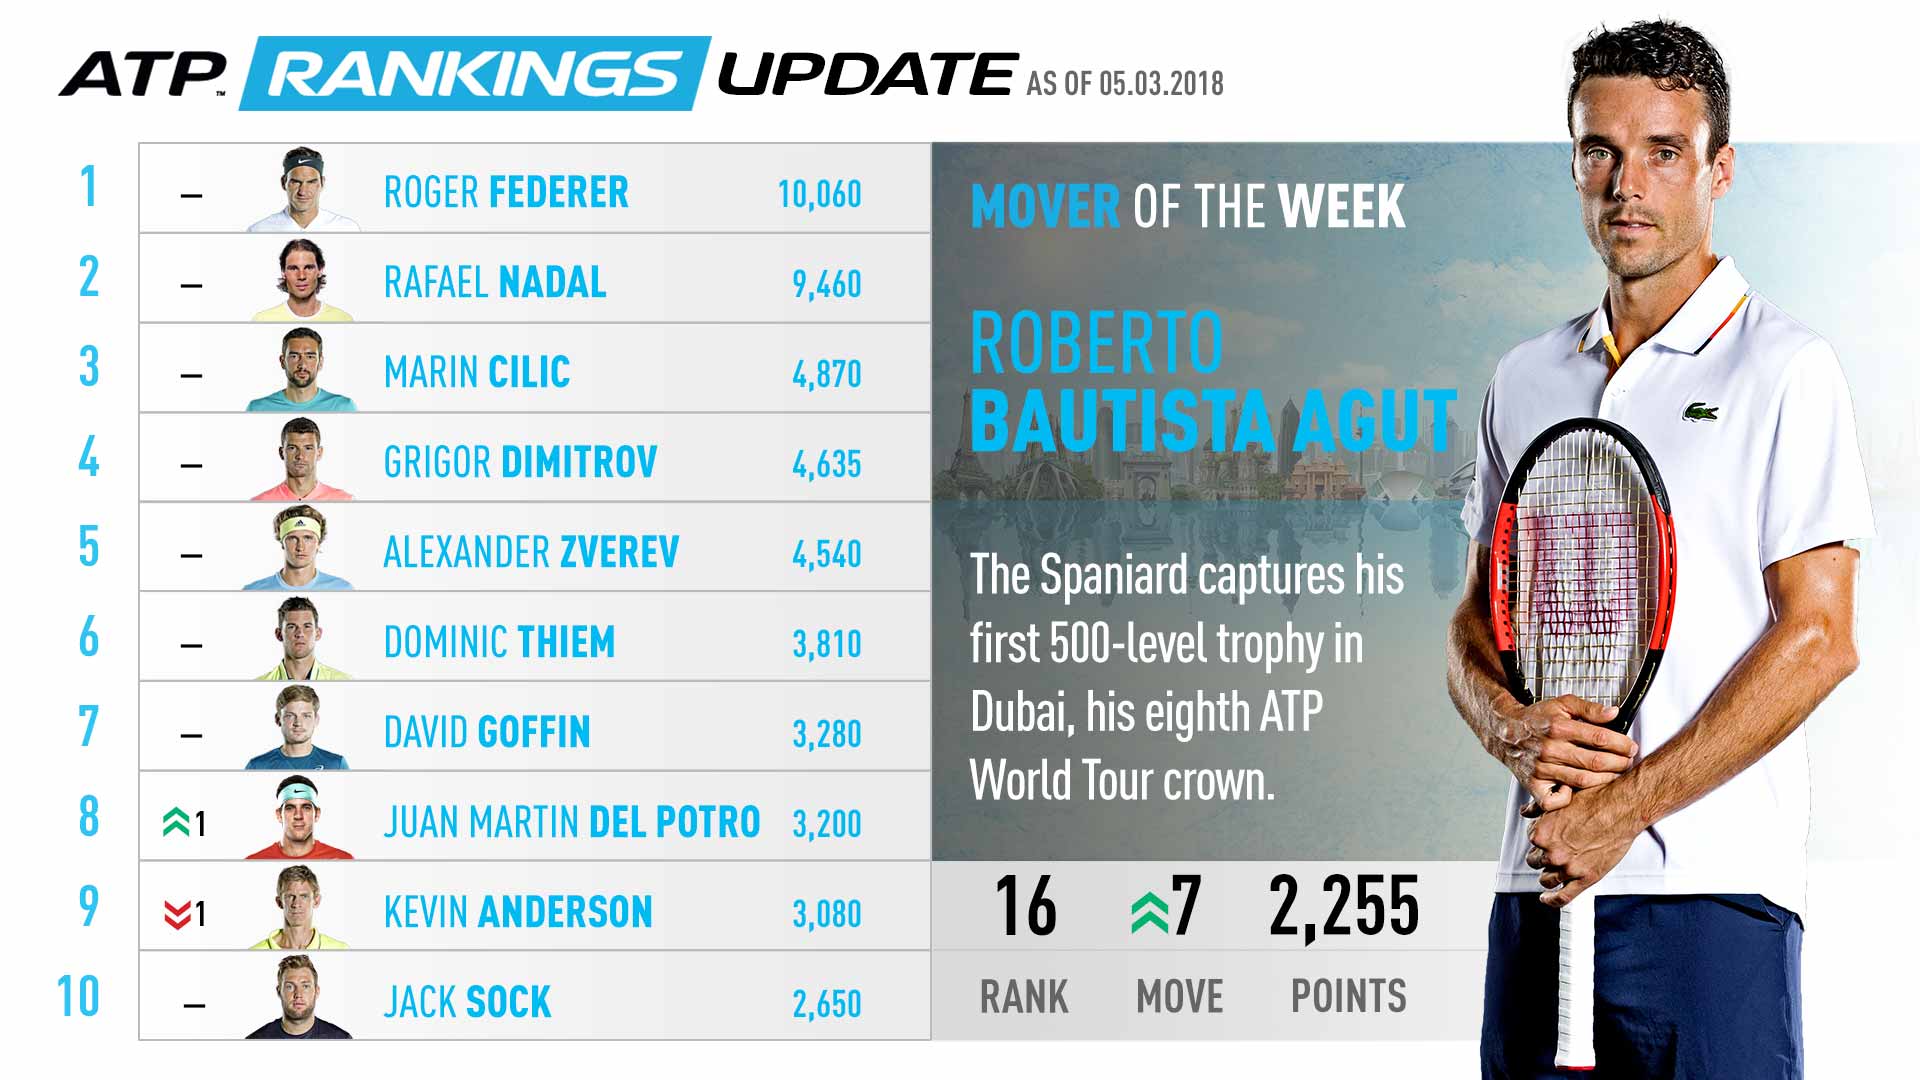 Bautista Agut Rises In ATP Rankings, Mover Of The Week ATP Tour Tennis